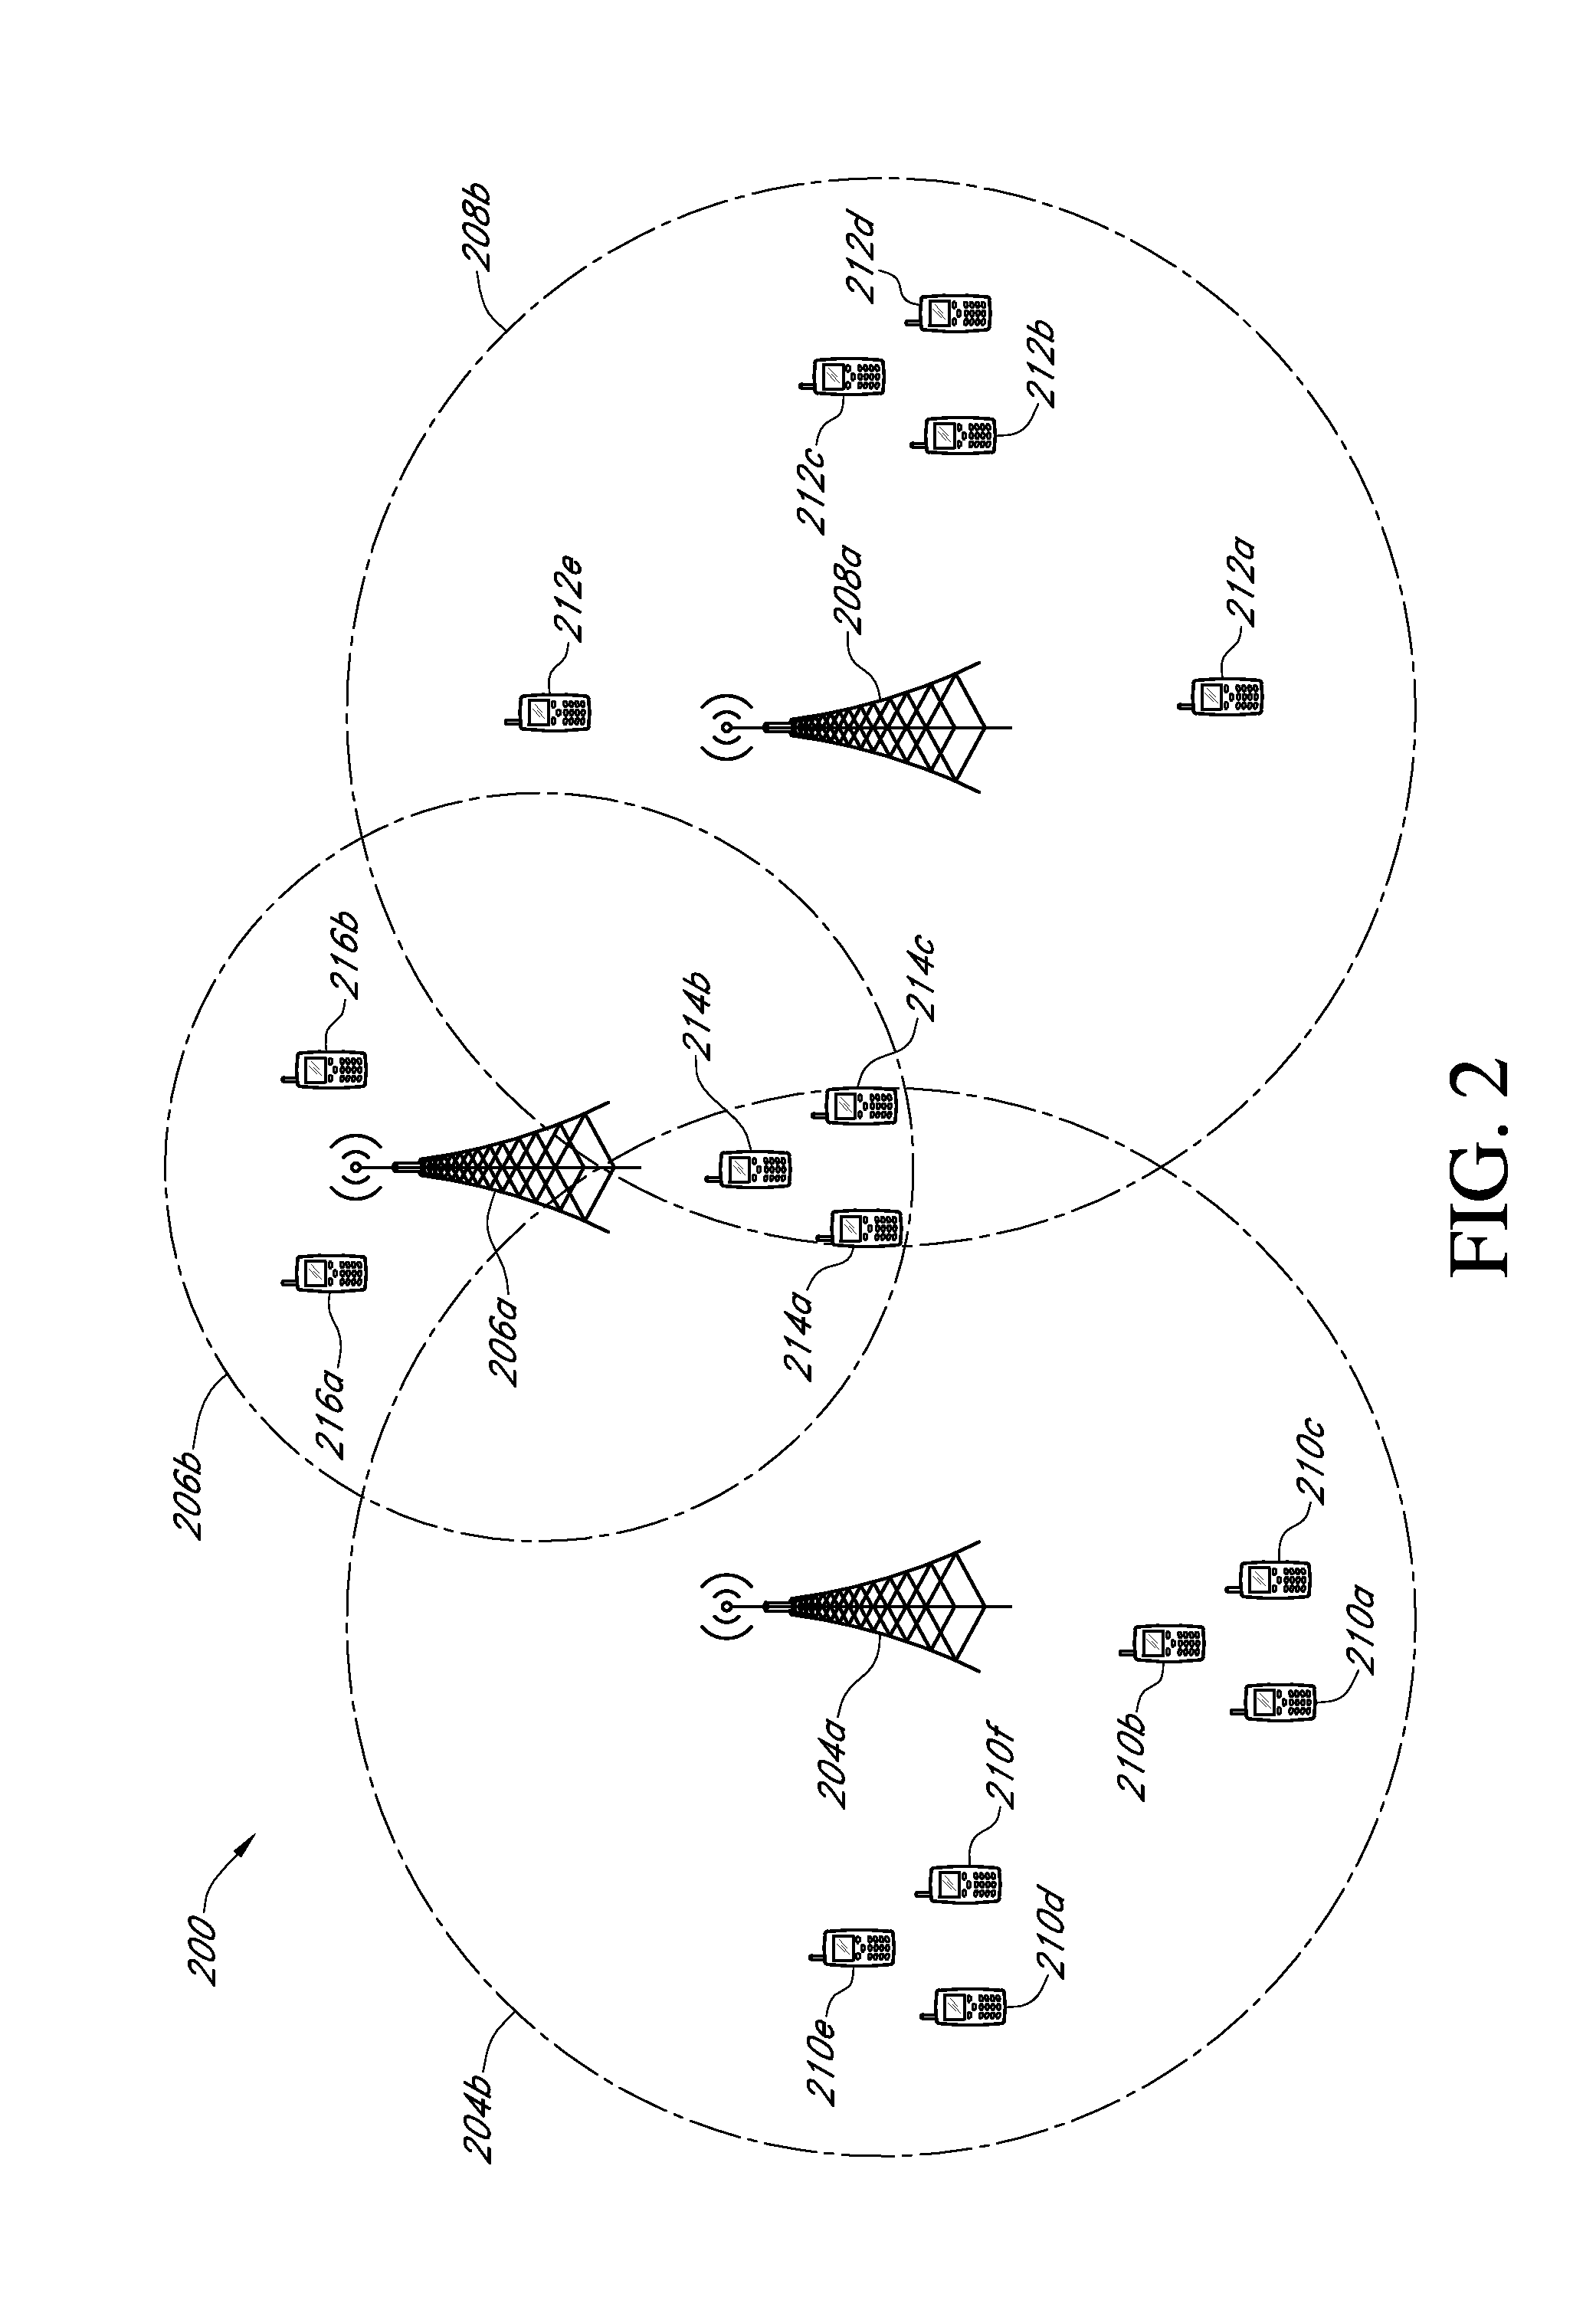 Systems and methods for mitigating intercell interference by coordinated scheduling amongst neighboring cells